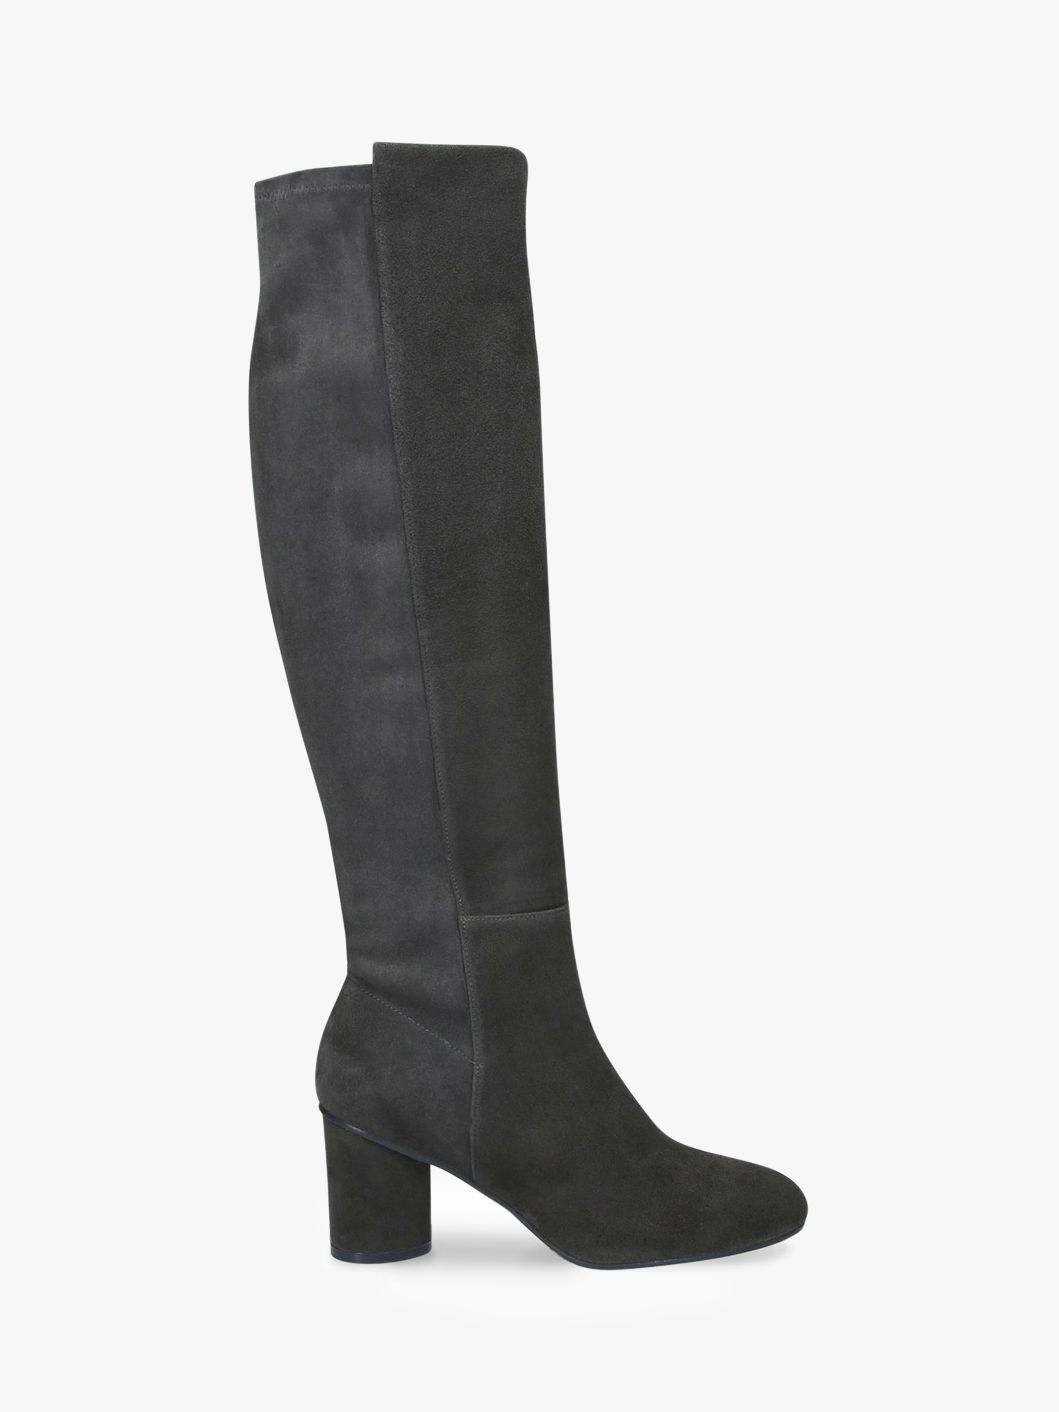 eloise over the knee boot